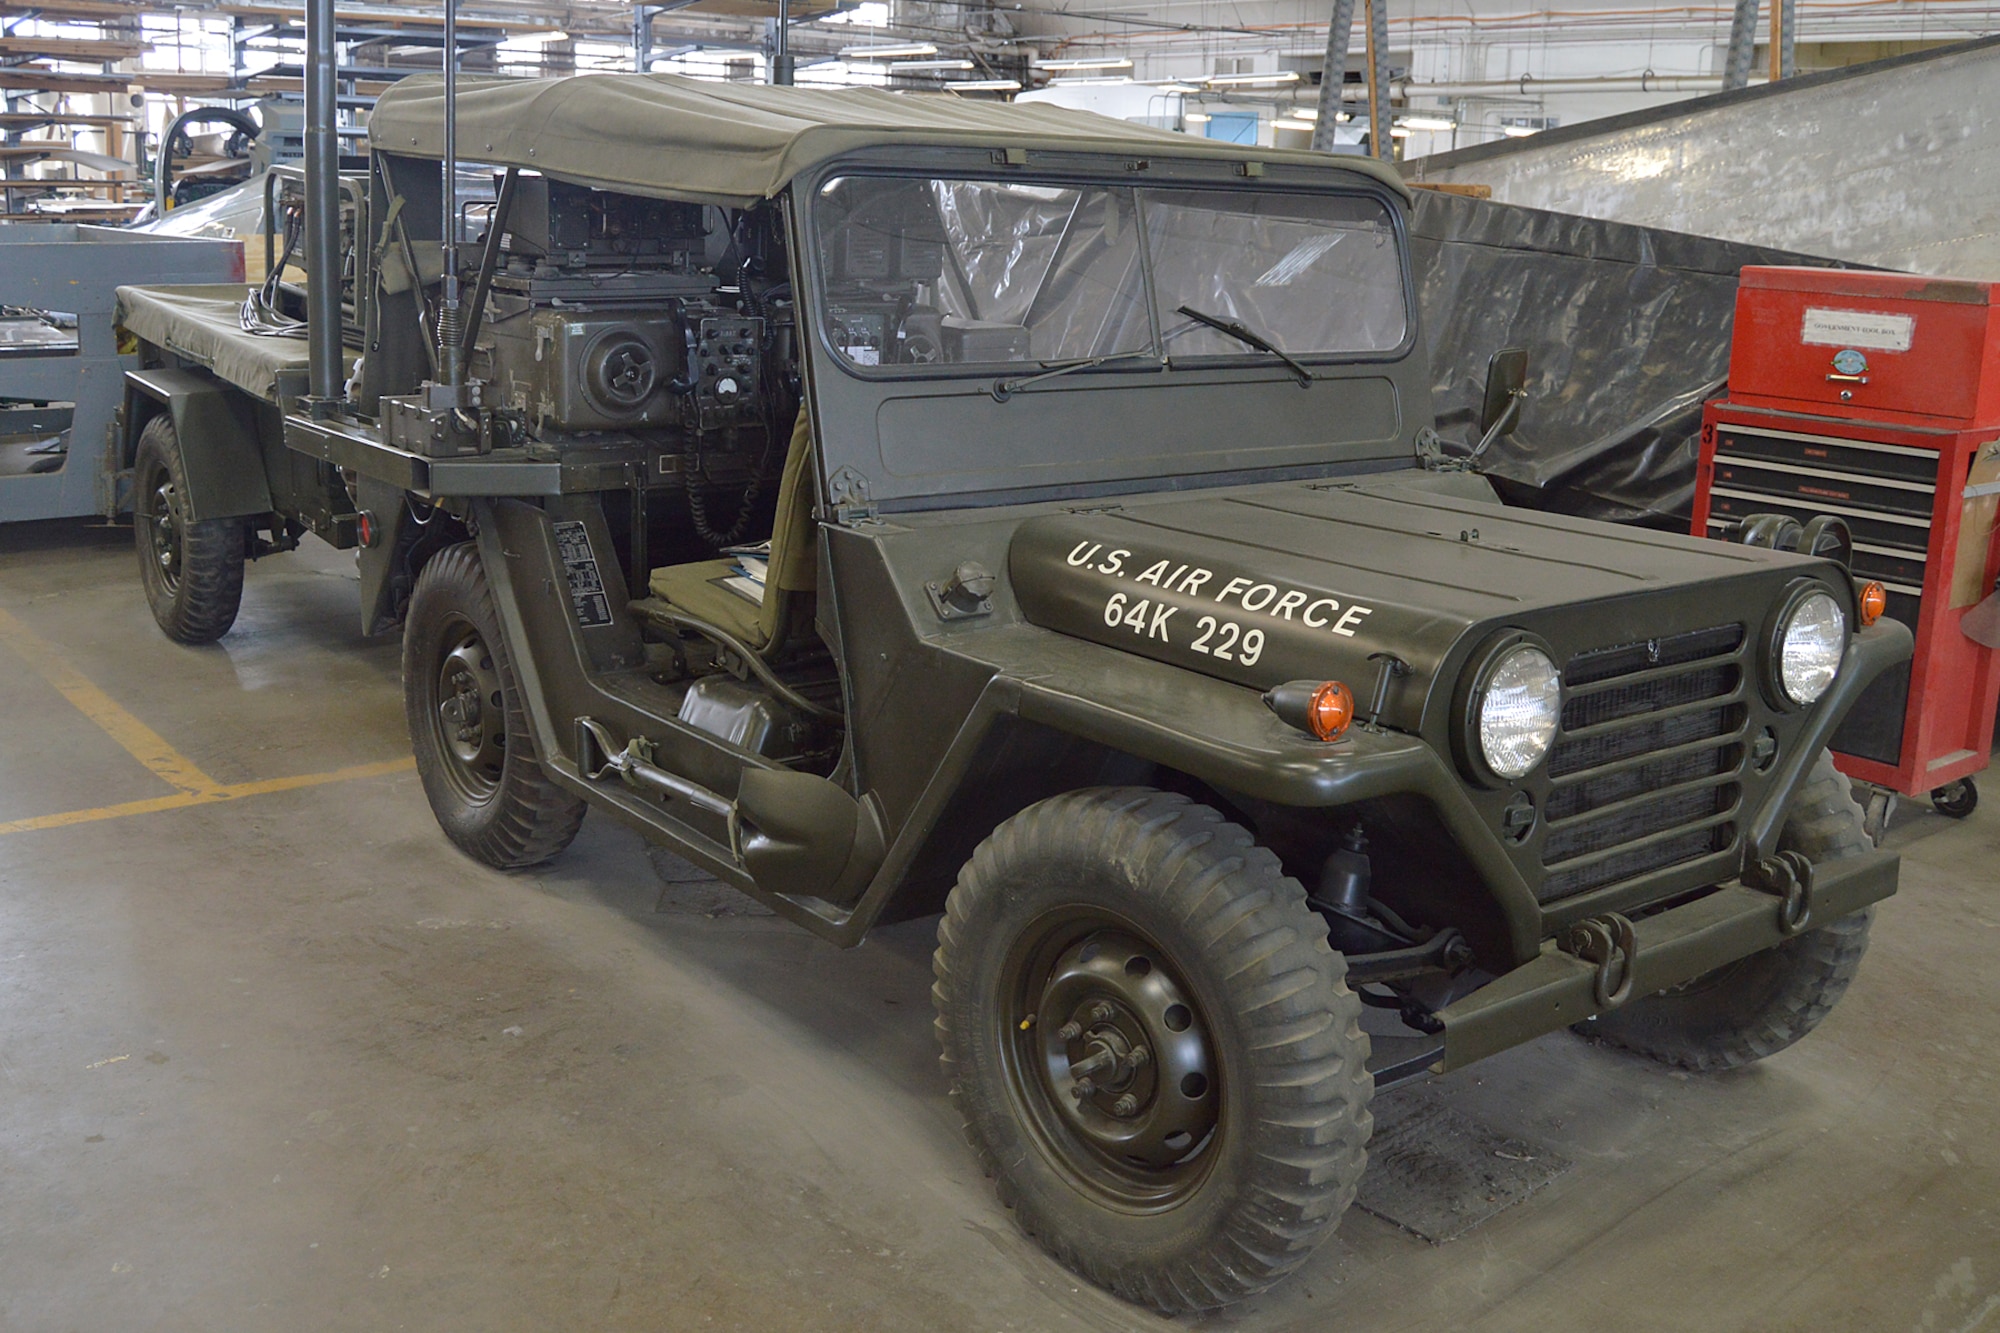 DAYTON, Ohio  -- Volunteers have nearly completed restoration work on the M151 Jeep. This vehicle was modified into a Forward Air Control (FAC) Jeep, which communicated with FAC aircraft to aid troops on the ground during the Southeast Asia War. (U.S. Air Force photo by Ken LaRock)